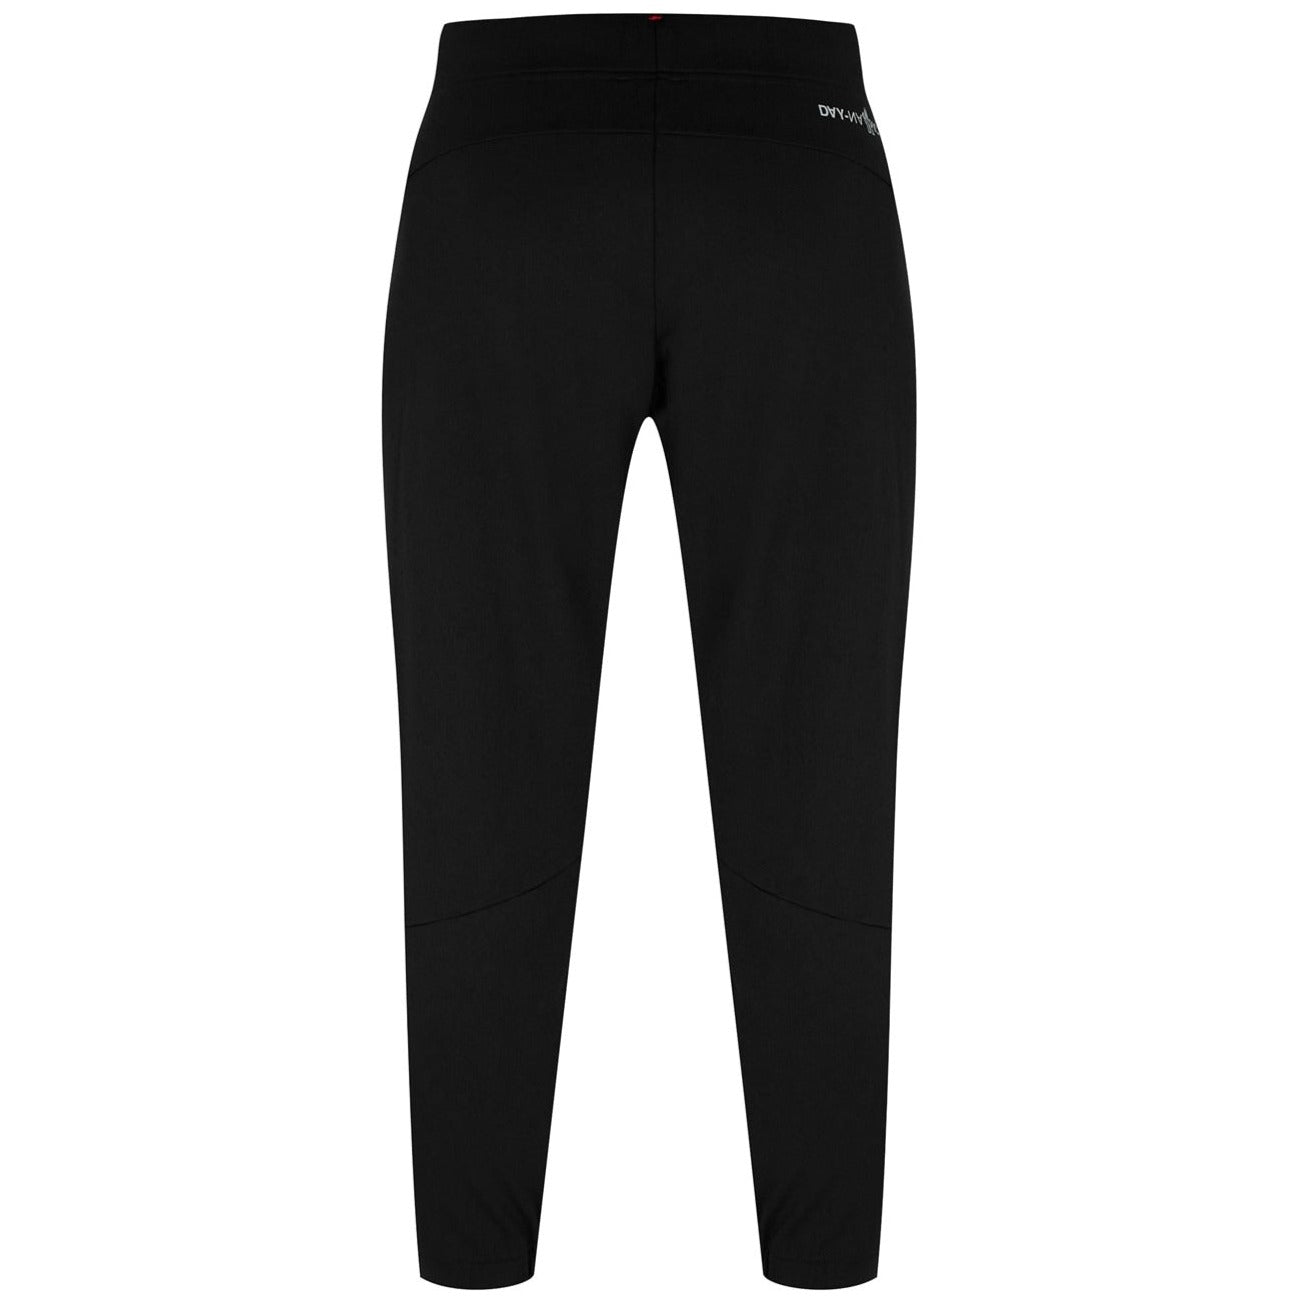 Moncler Grenoble Black Cuffed Joggers - DANYOUNGUK